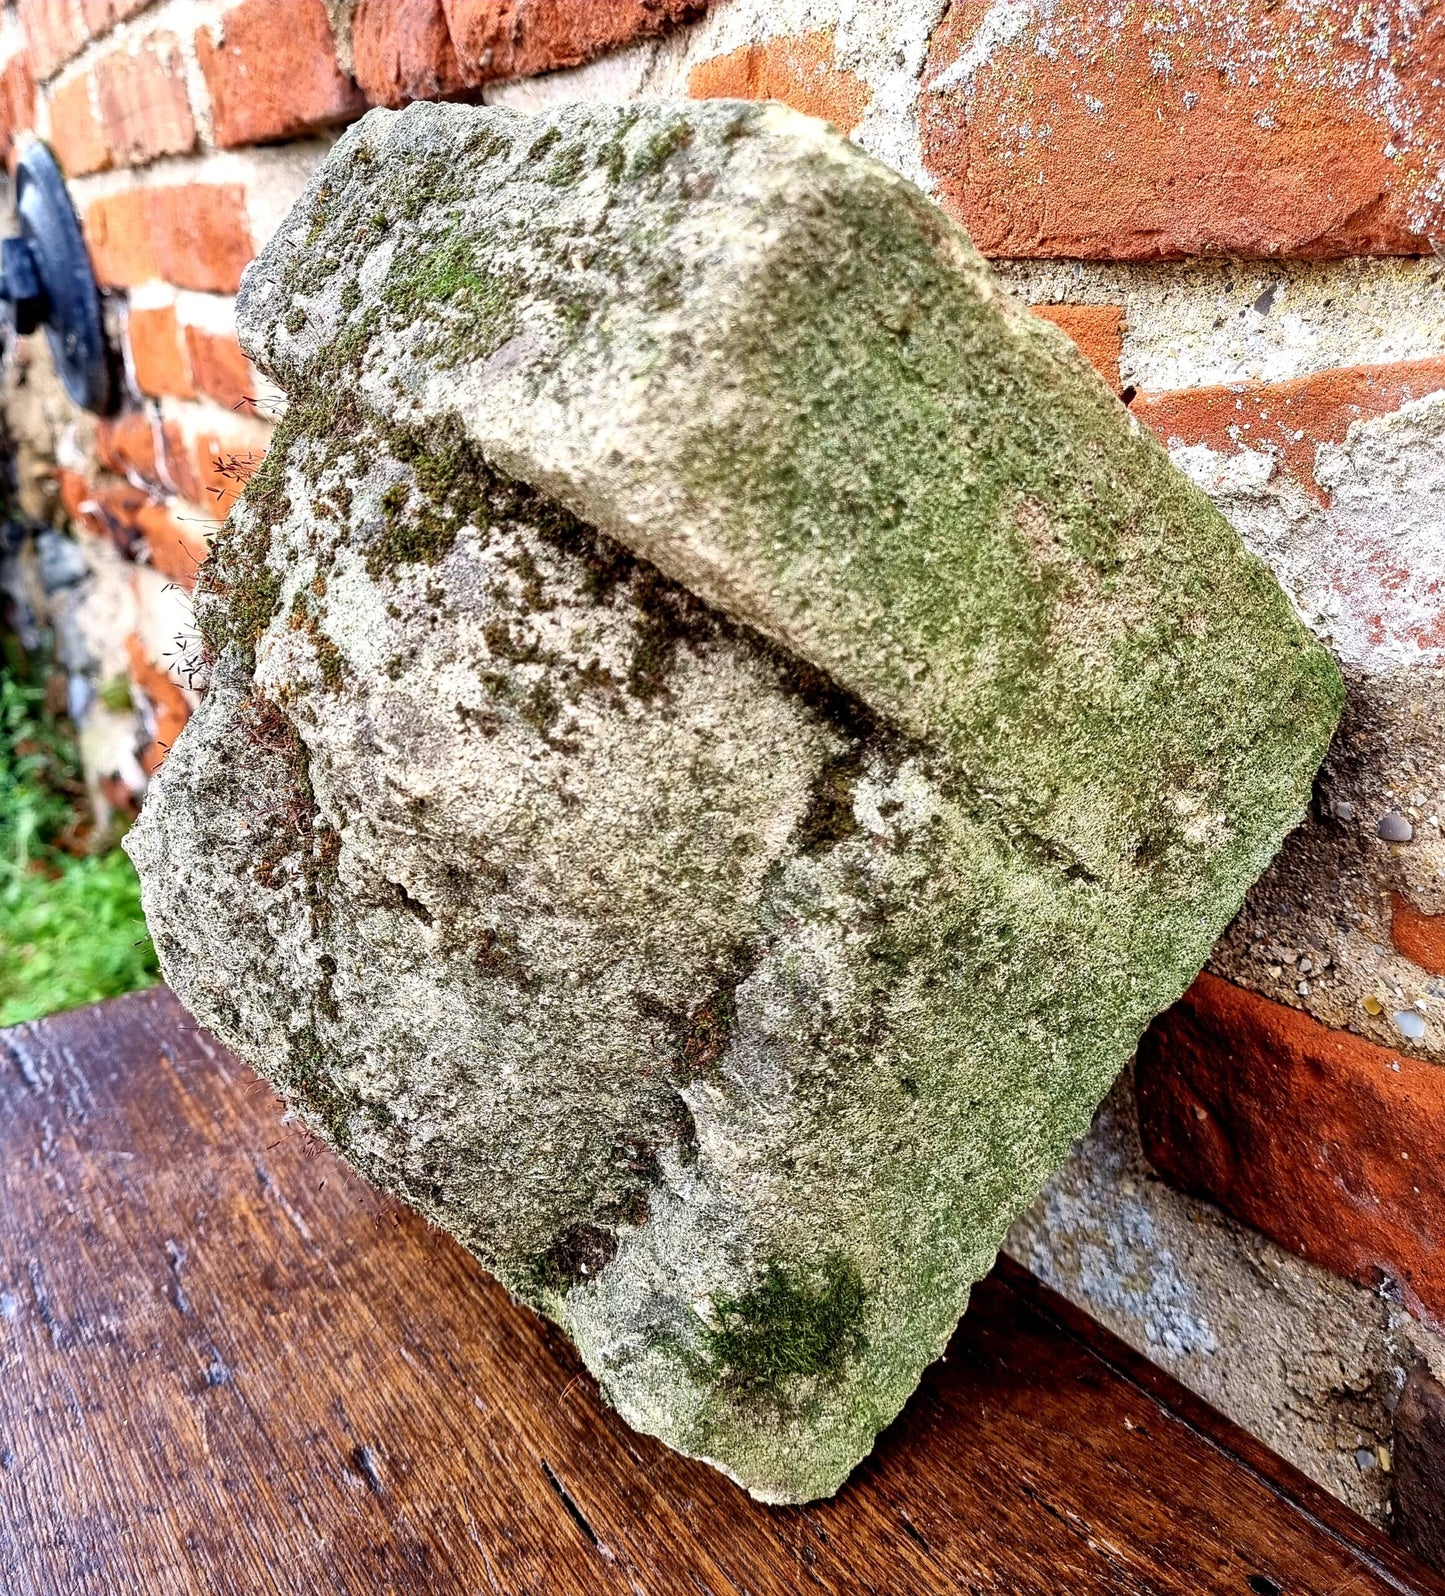 Naive Medieval / Gothic Antique Carved Stone Corbel Fragment Depicting a Male's head